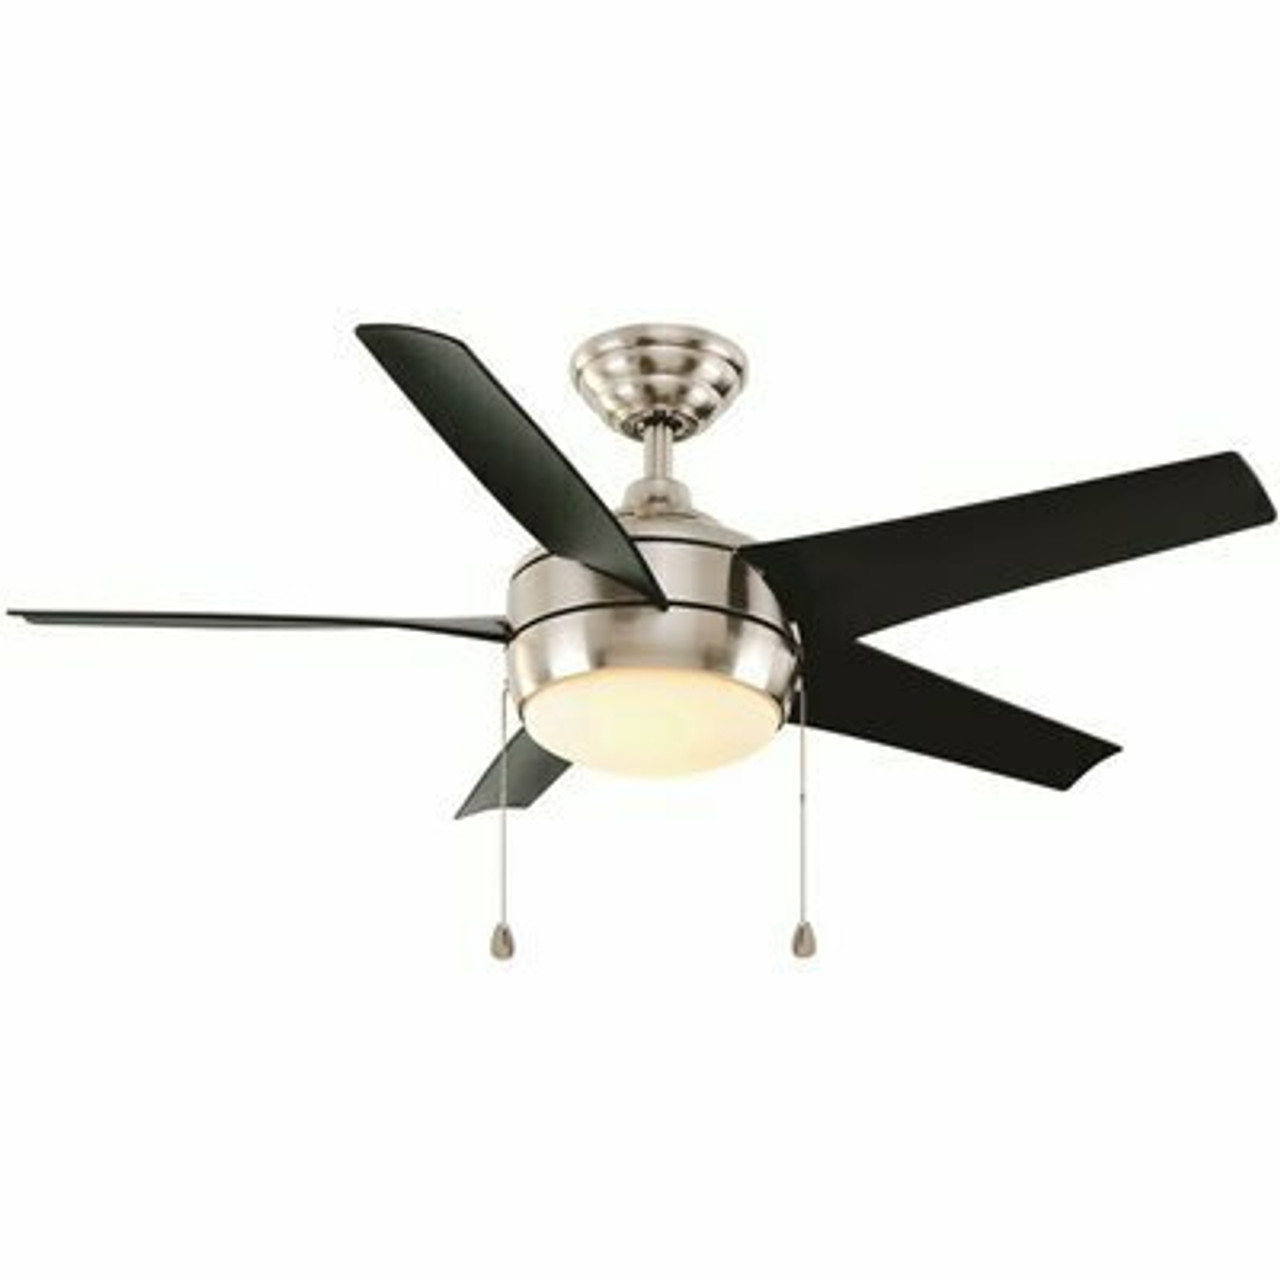 Home Decorators Collection Windward 44 In. Led Brushed Nickel Ceiling Fan With Light Kit